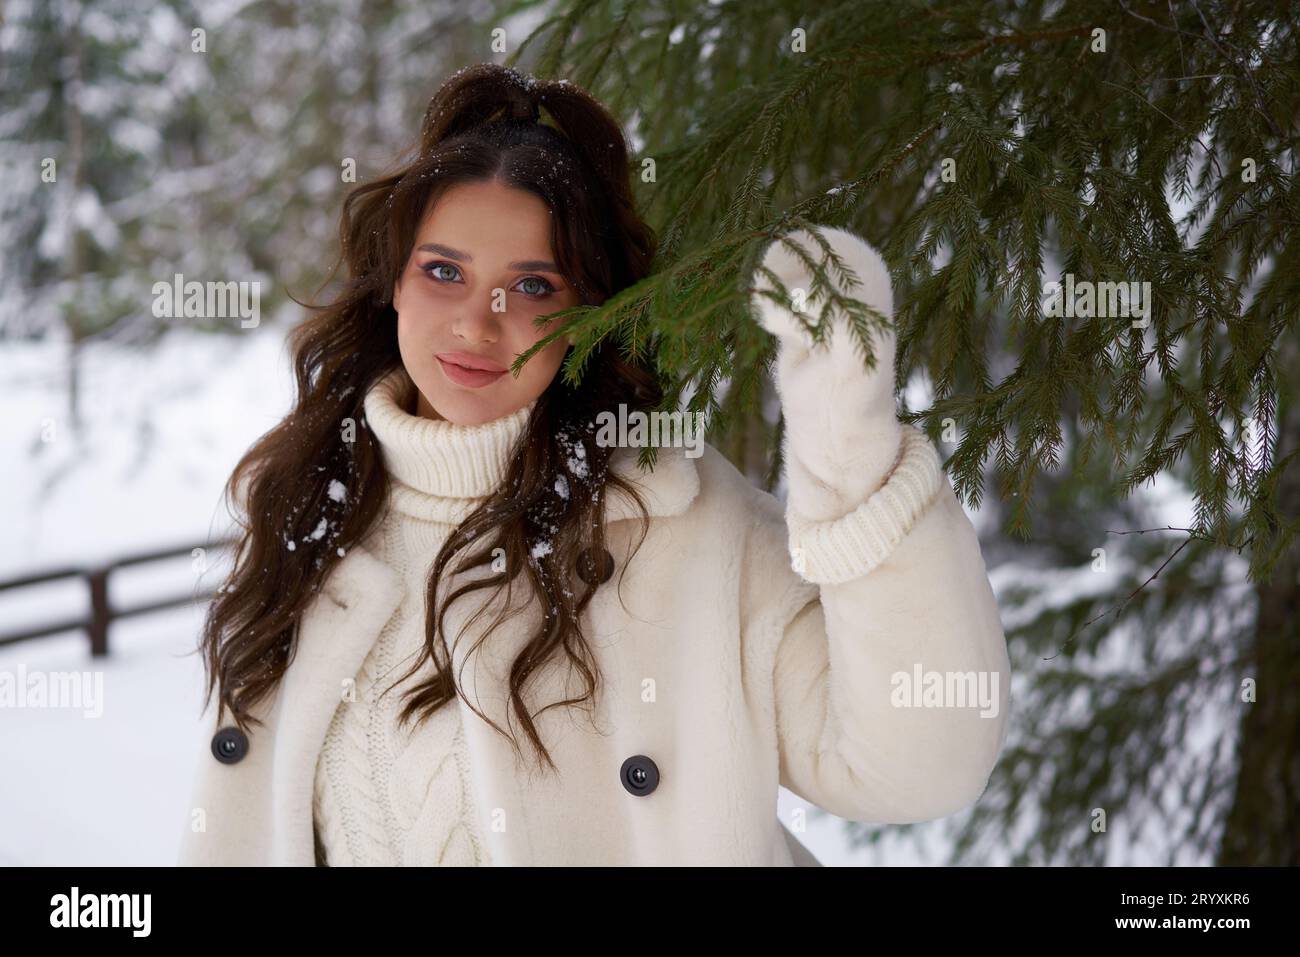 Beautiful woman in white fur posing near spruces in snow. Winter. Stock Photo